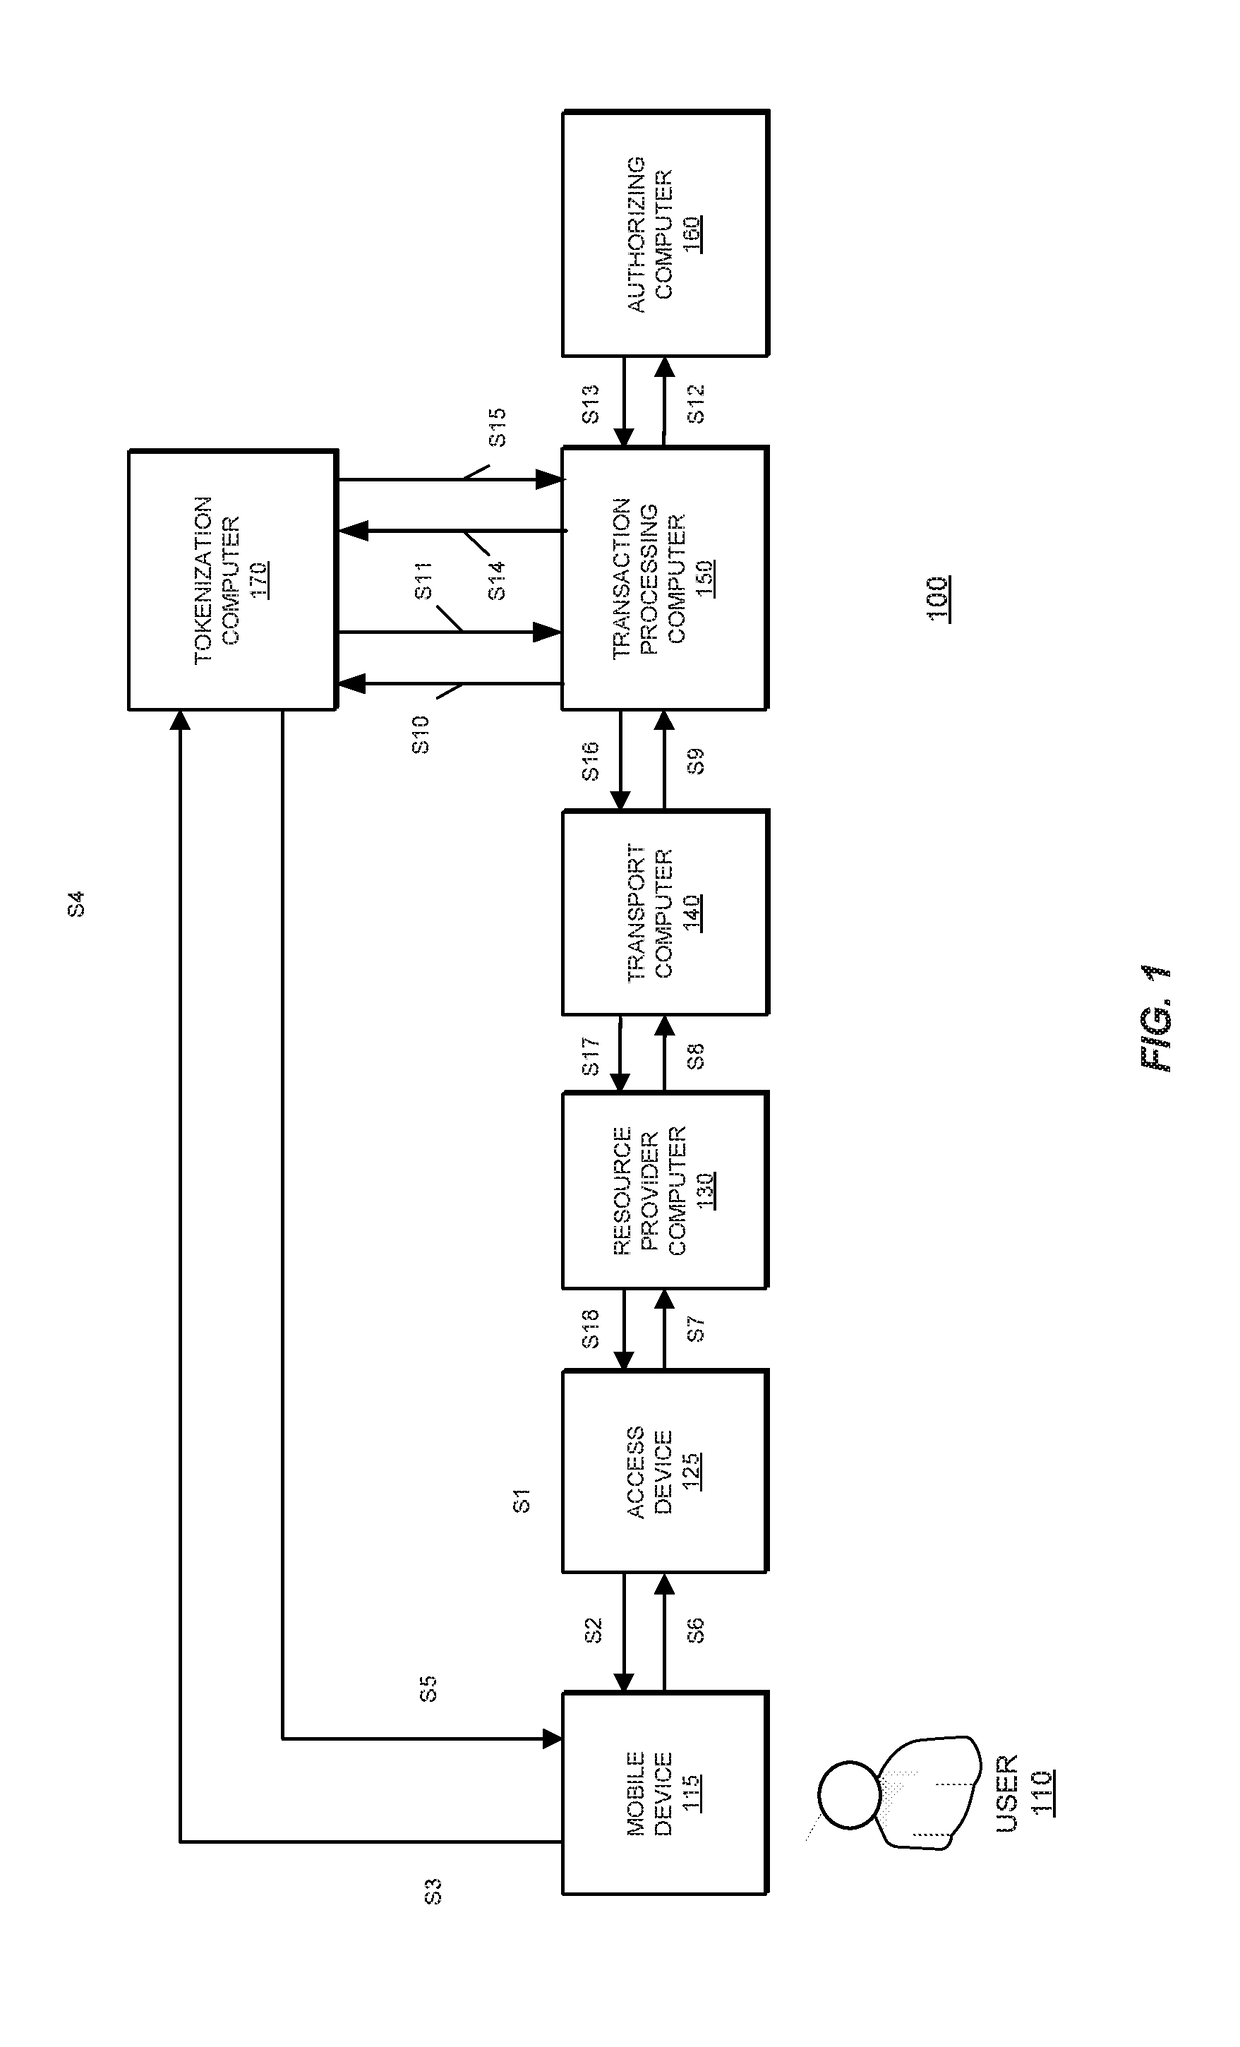 Token and cryptogram using transaction specific information